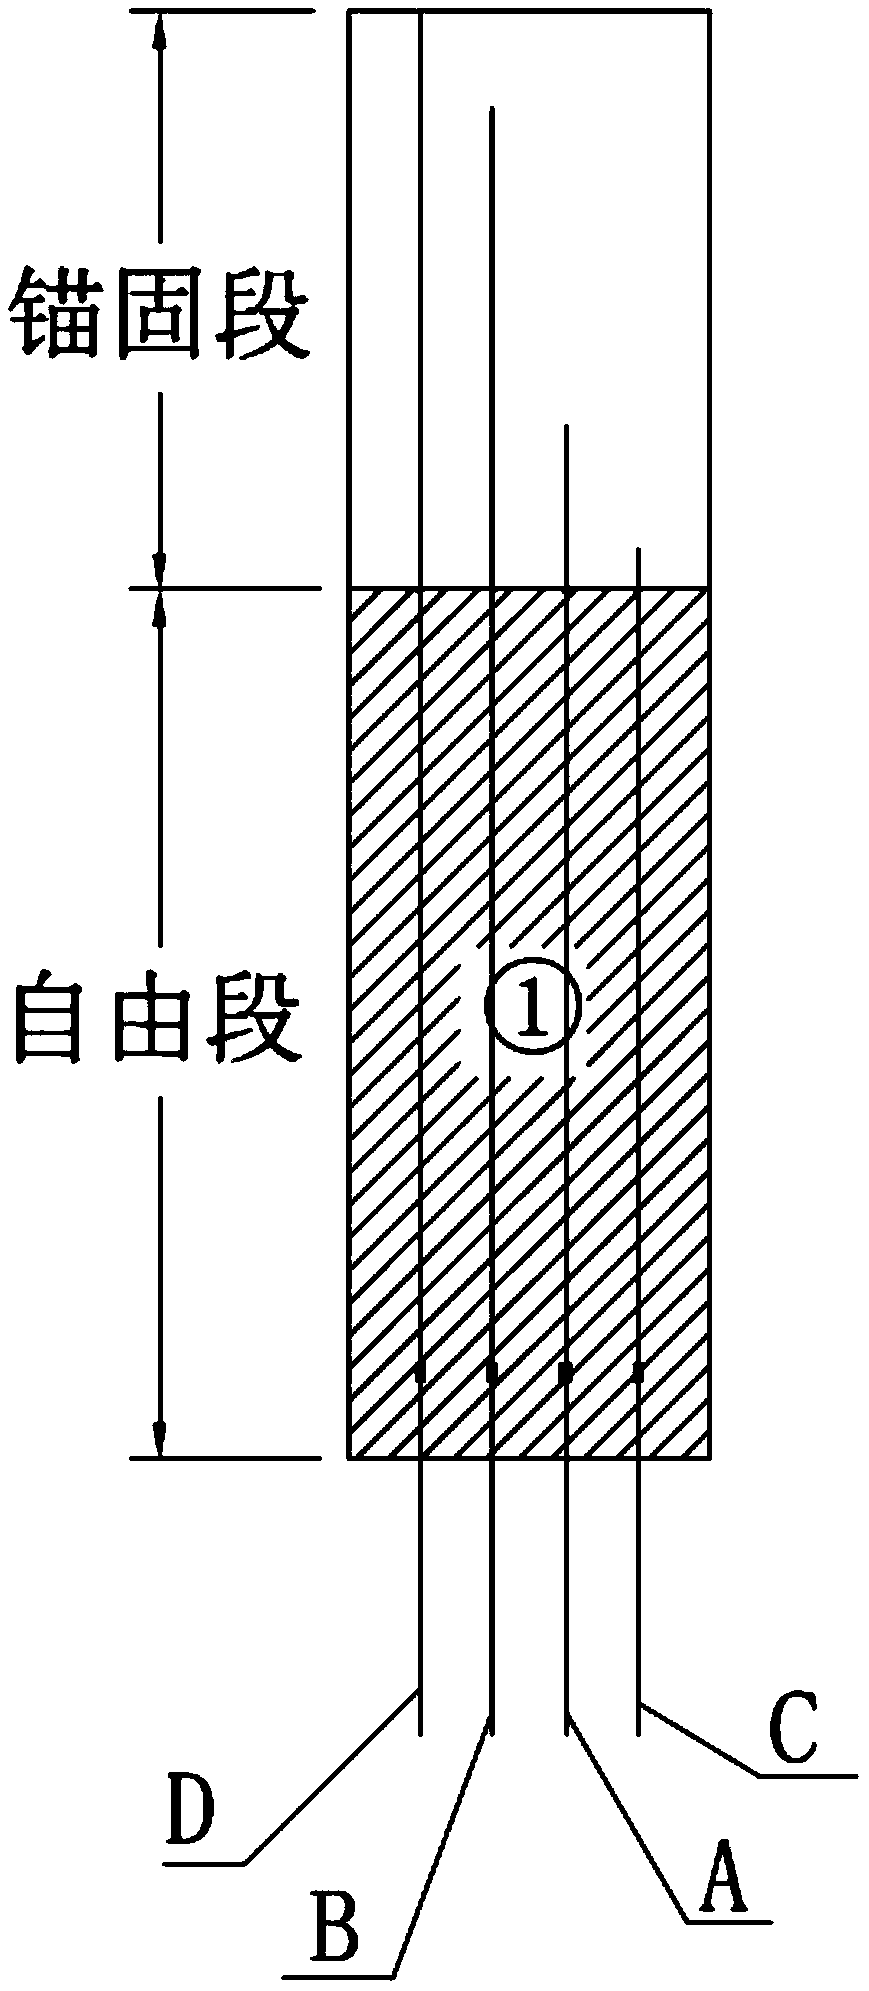 A grouting construction method for rapidly tensioning anchor cables